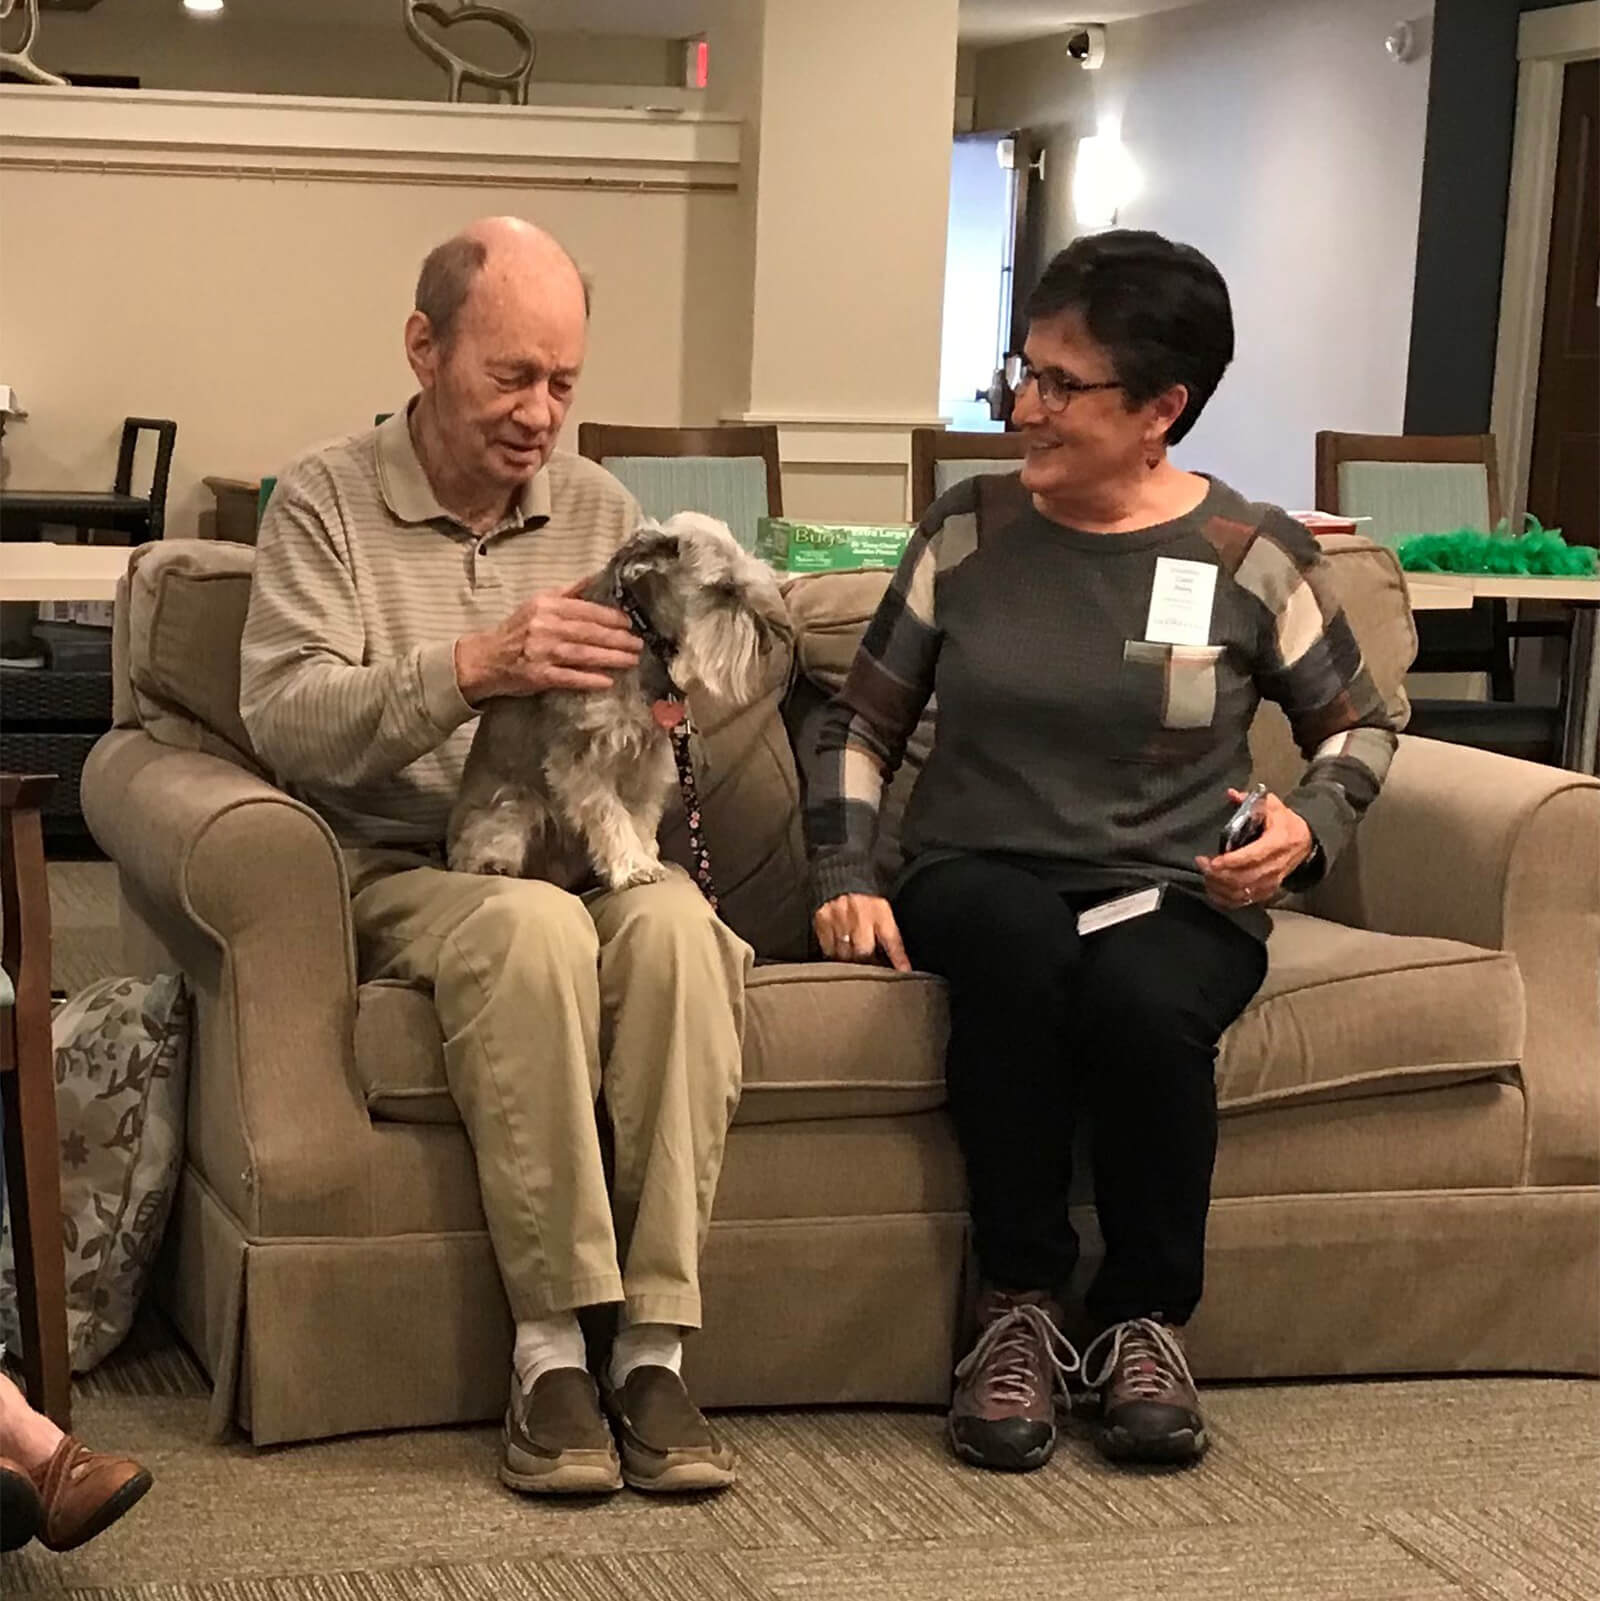 A heartwarming scene of pet therapy at The Waters on Mayowood, where a resident enjoys time with a visiting dog, emphasizing compassionate care.